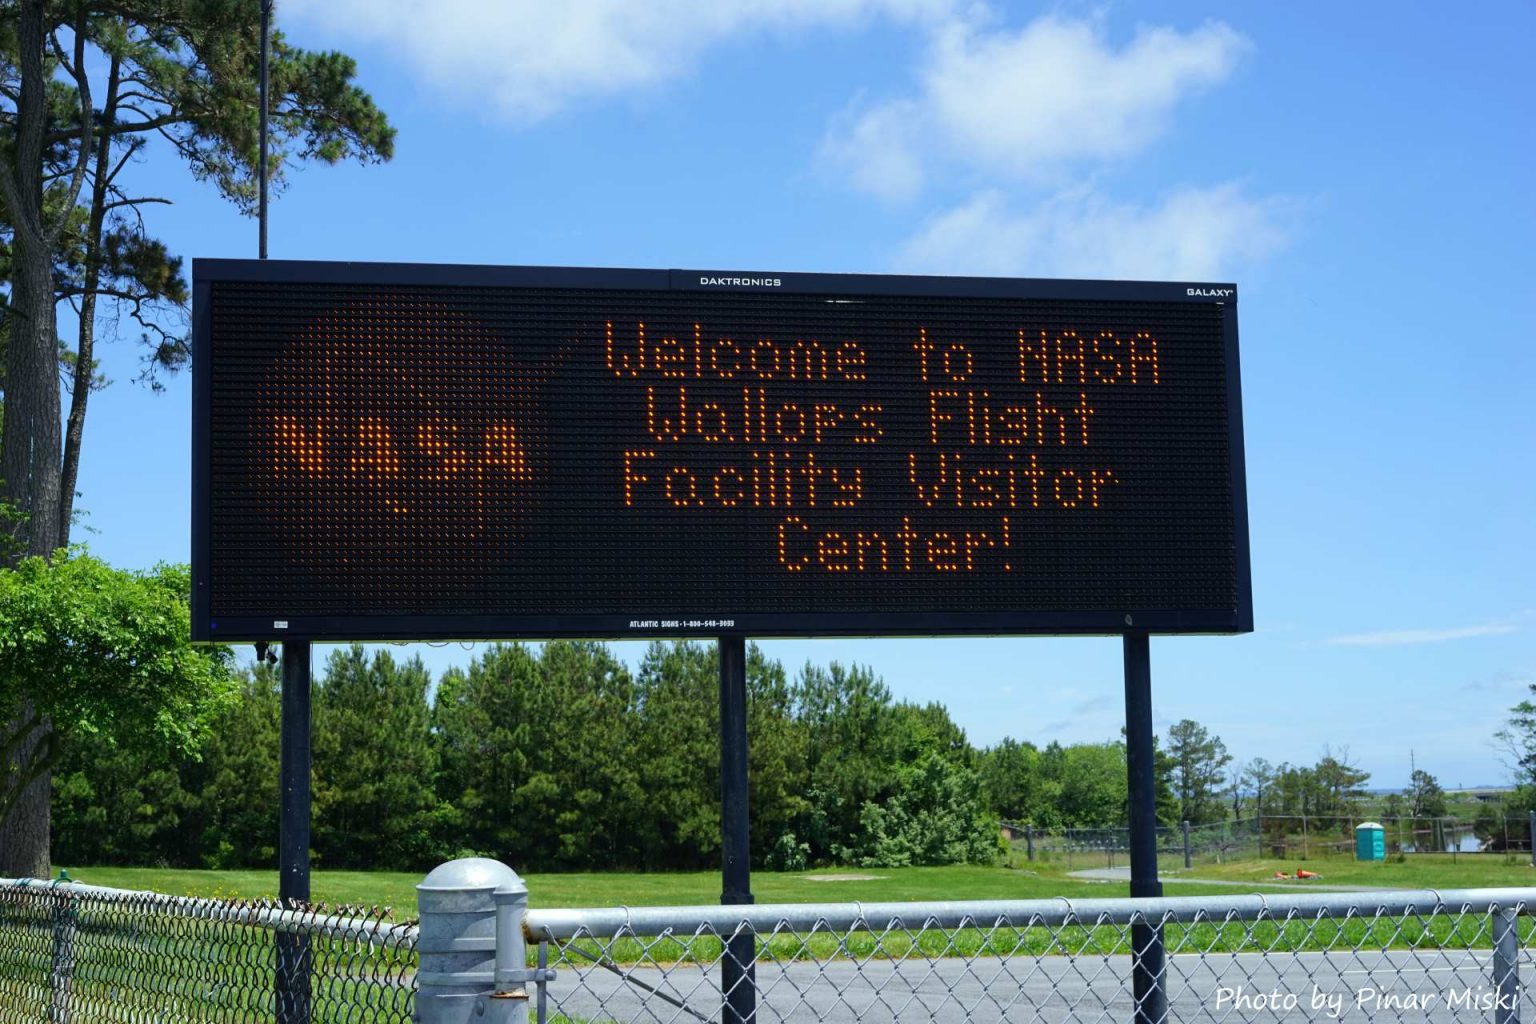 Stop by and visit the NASA Wallops visitor center on the way to Chincoteague